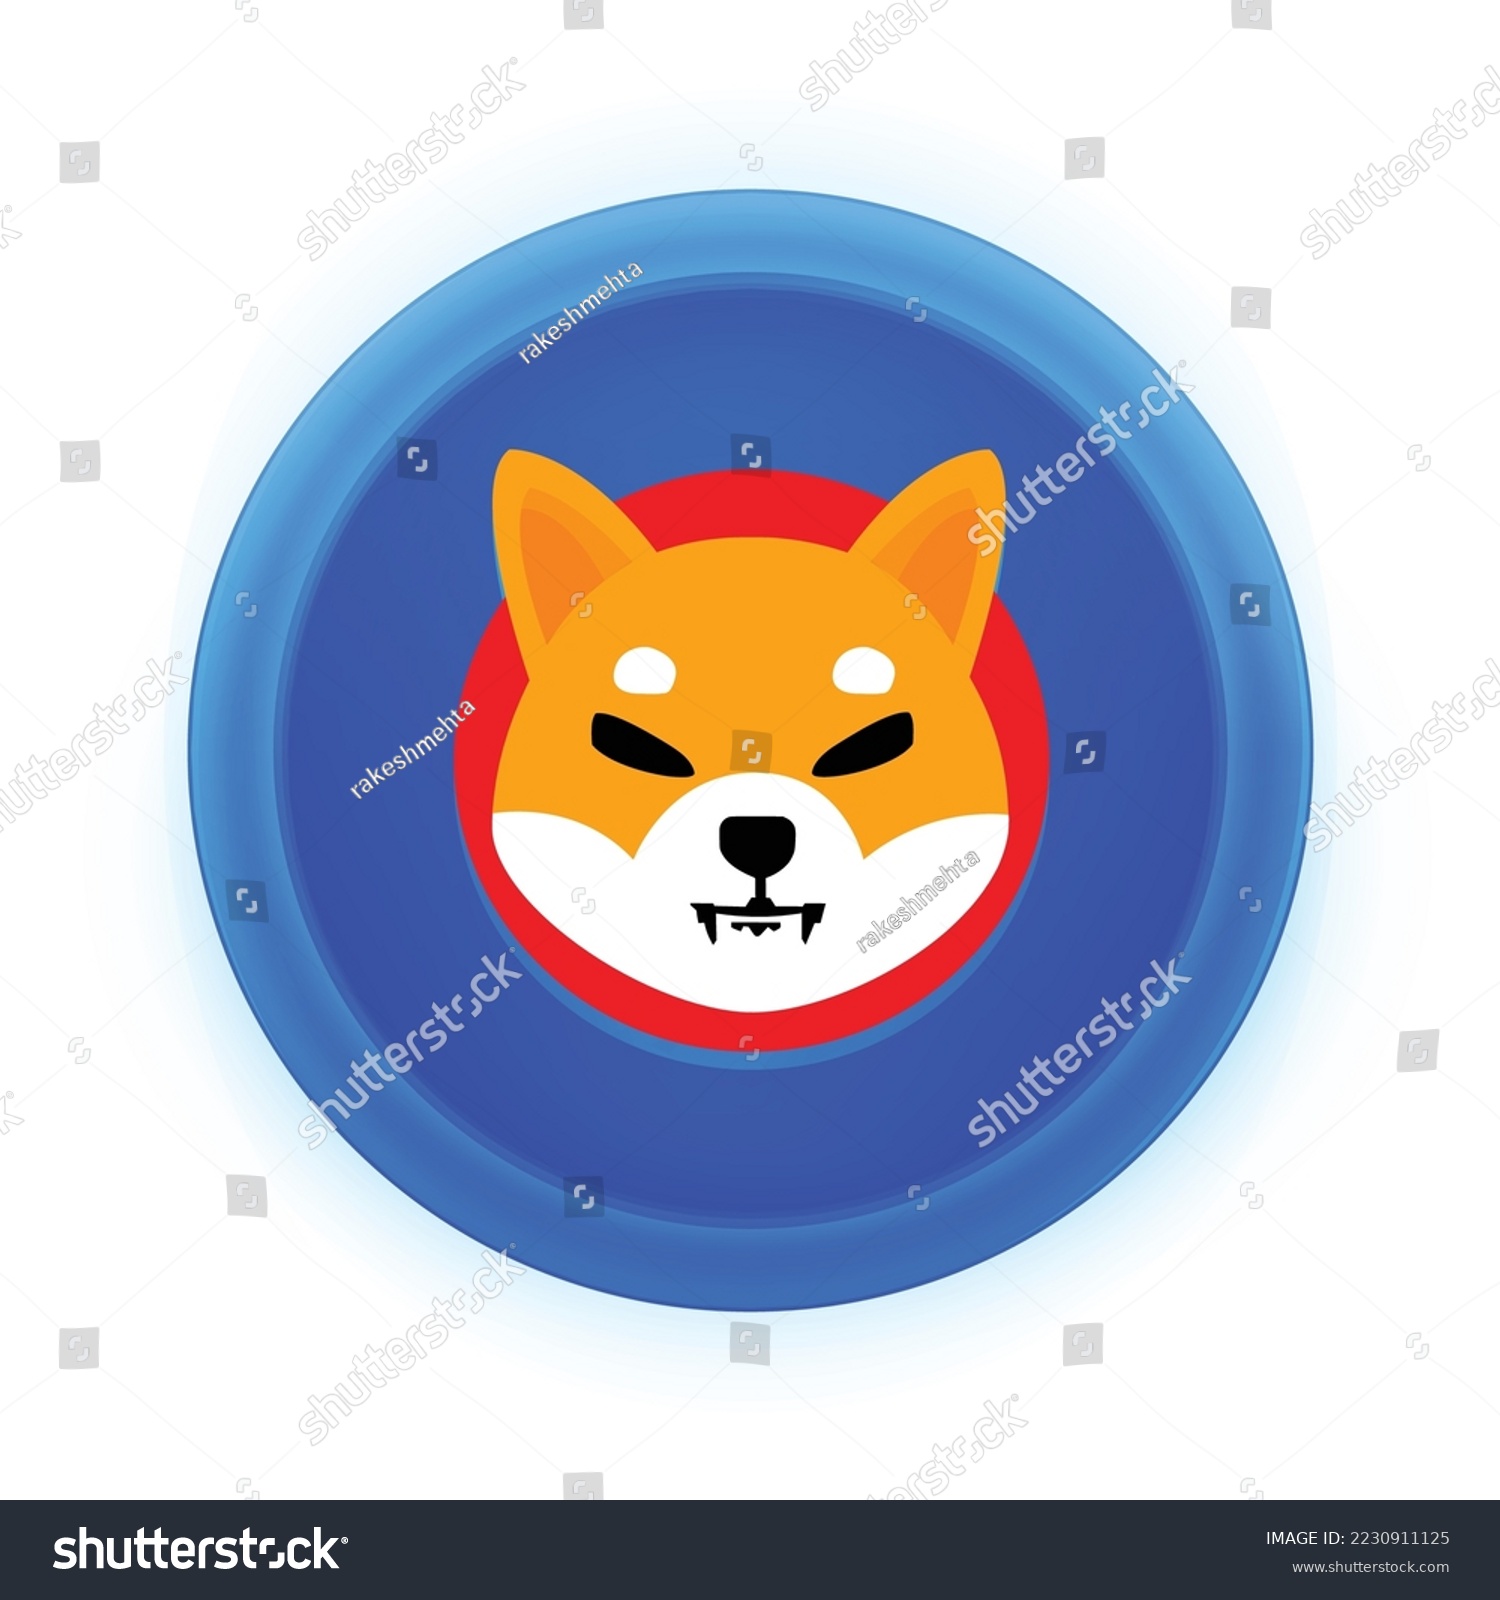 SVG of Shiba Inu (SHIB) crypto logo isolated on white background. SHIB Cryptocurrency coin token vector svg